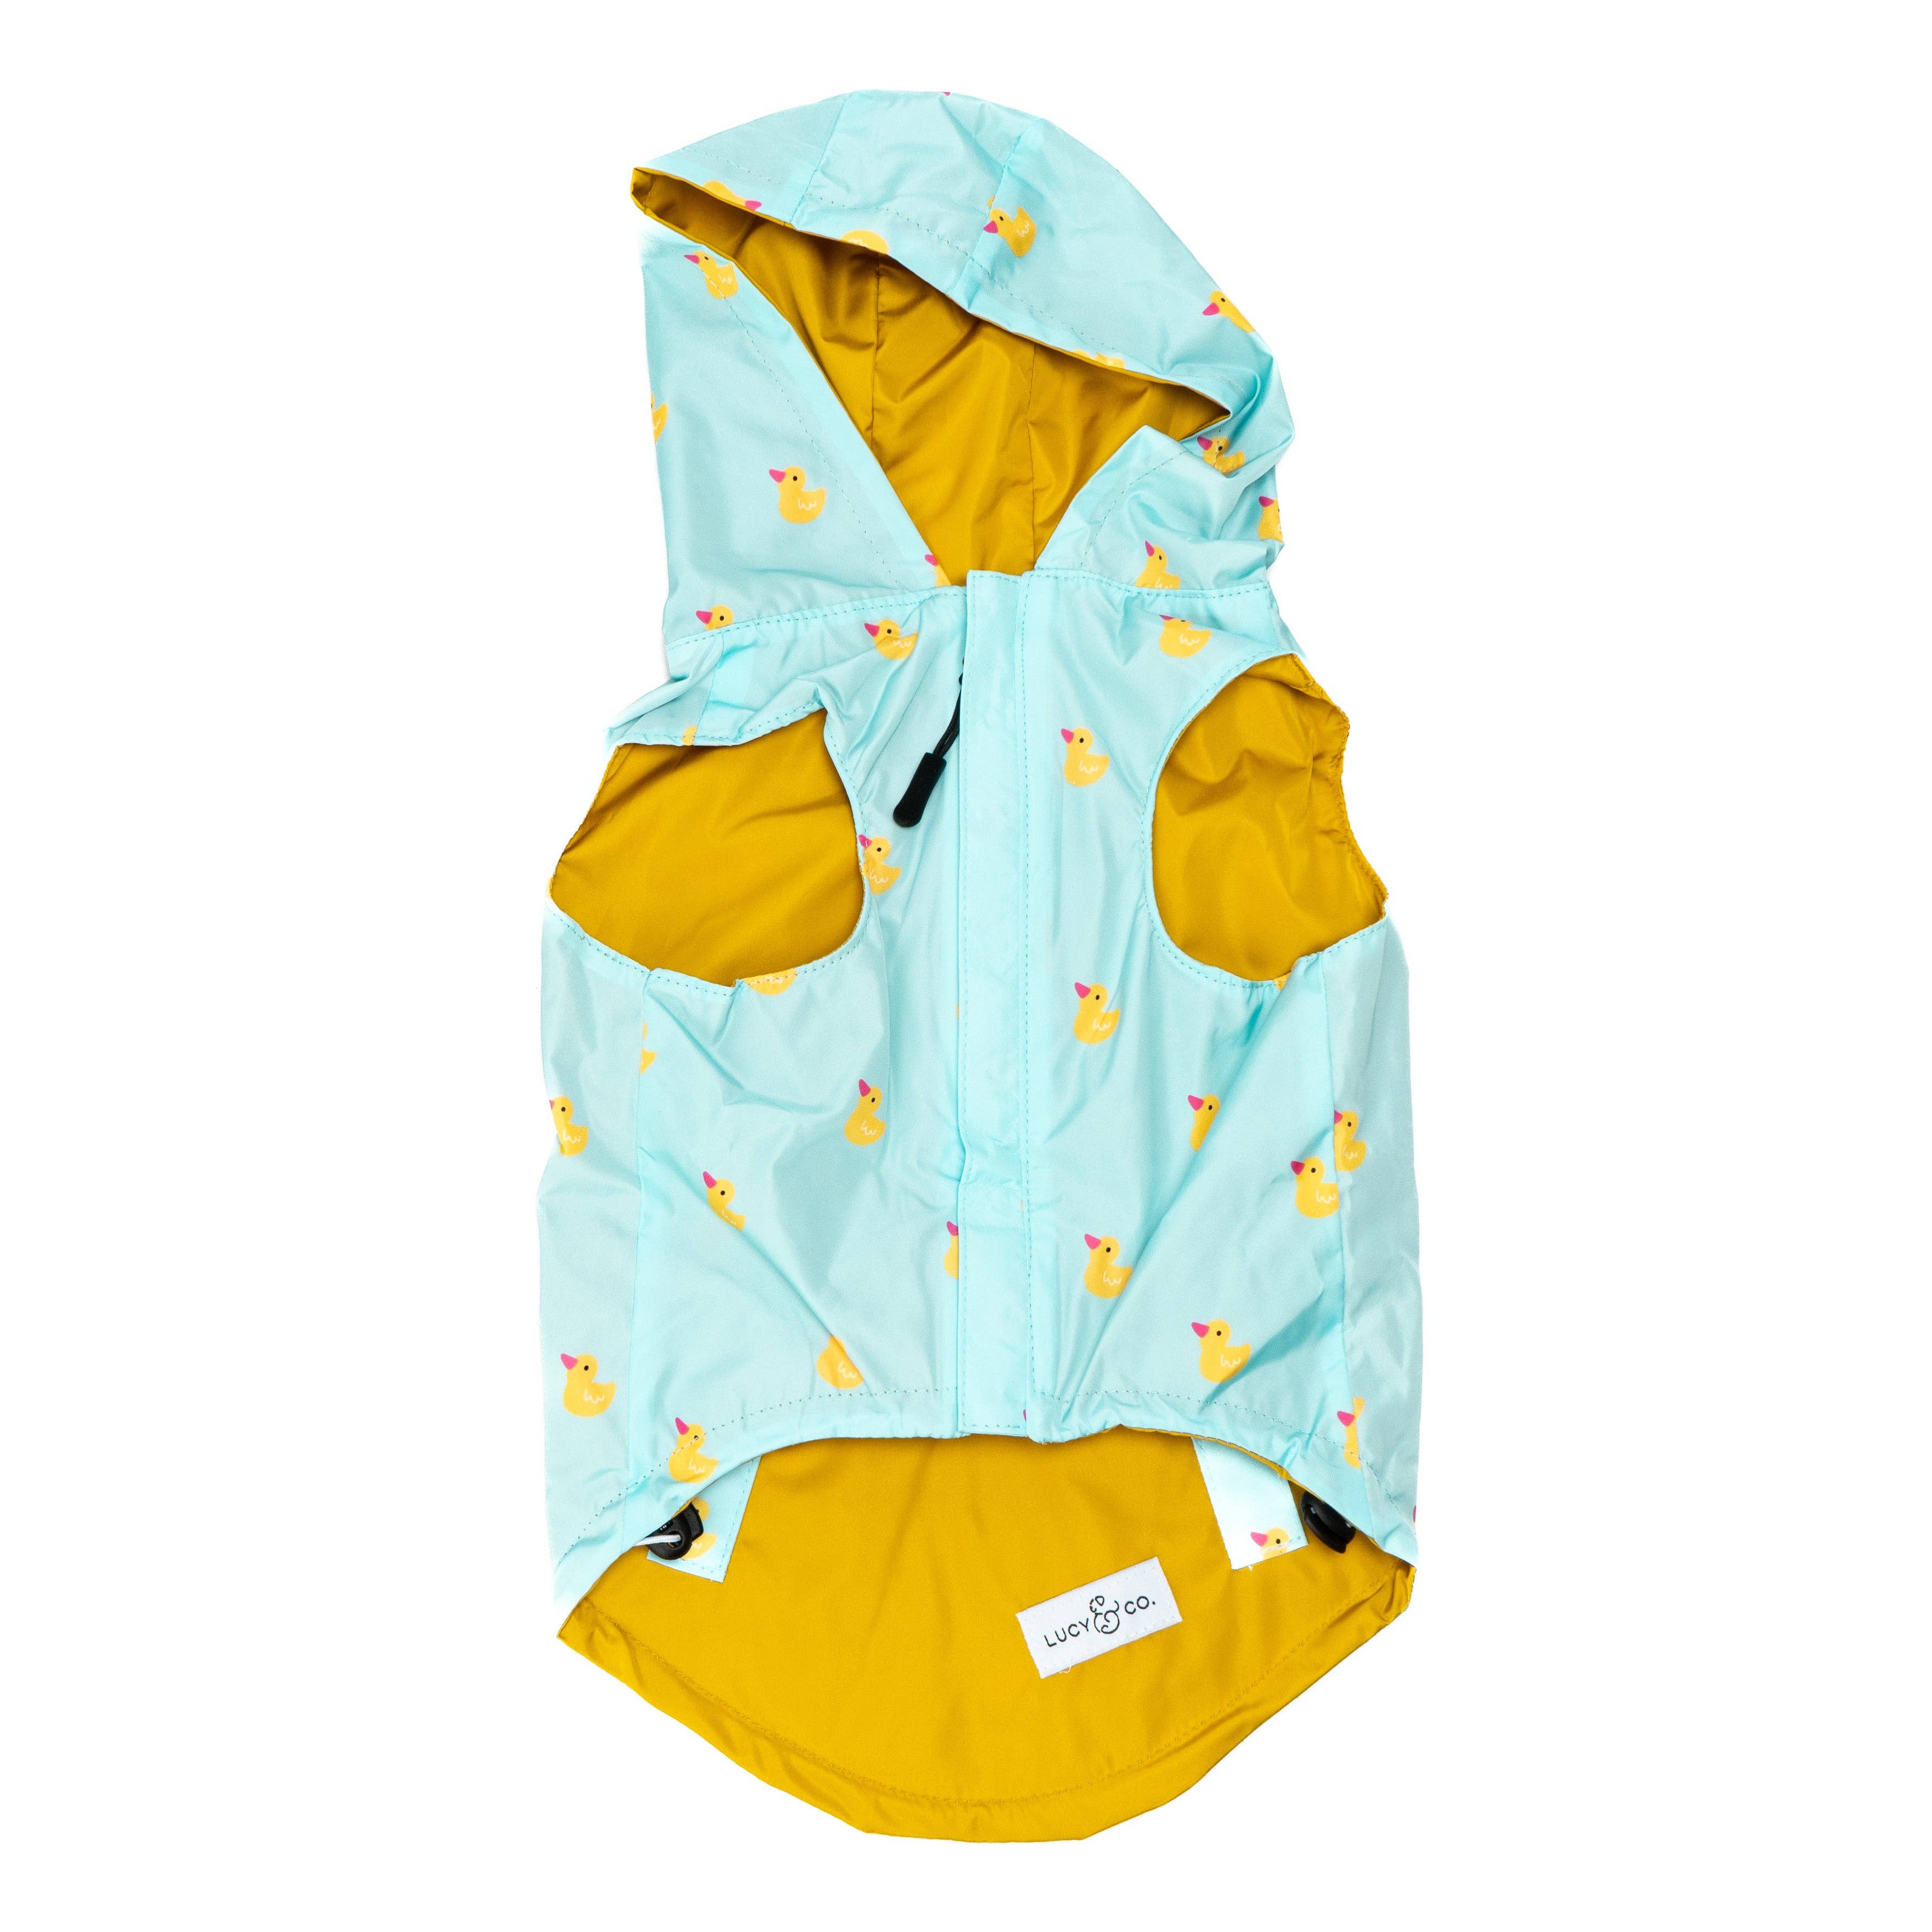 Lucy & Co. - The Lucky Ducky Reversible Raincoat